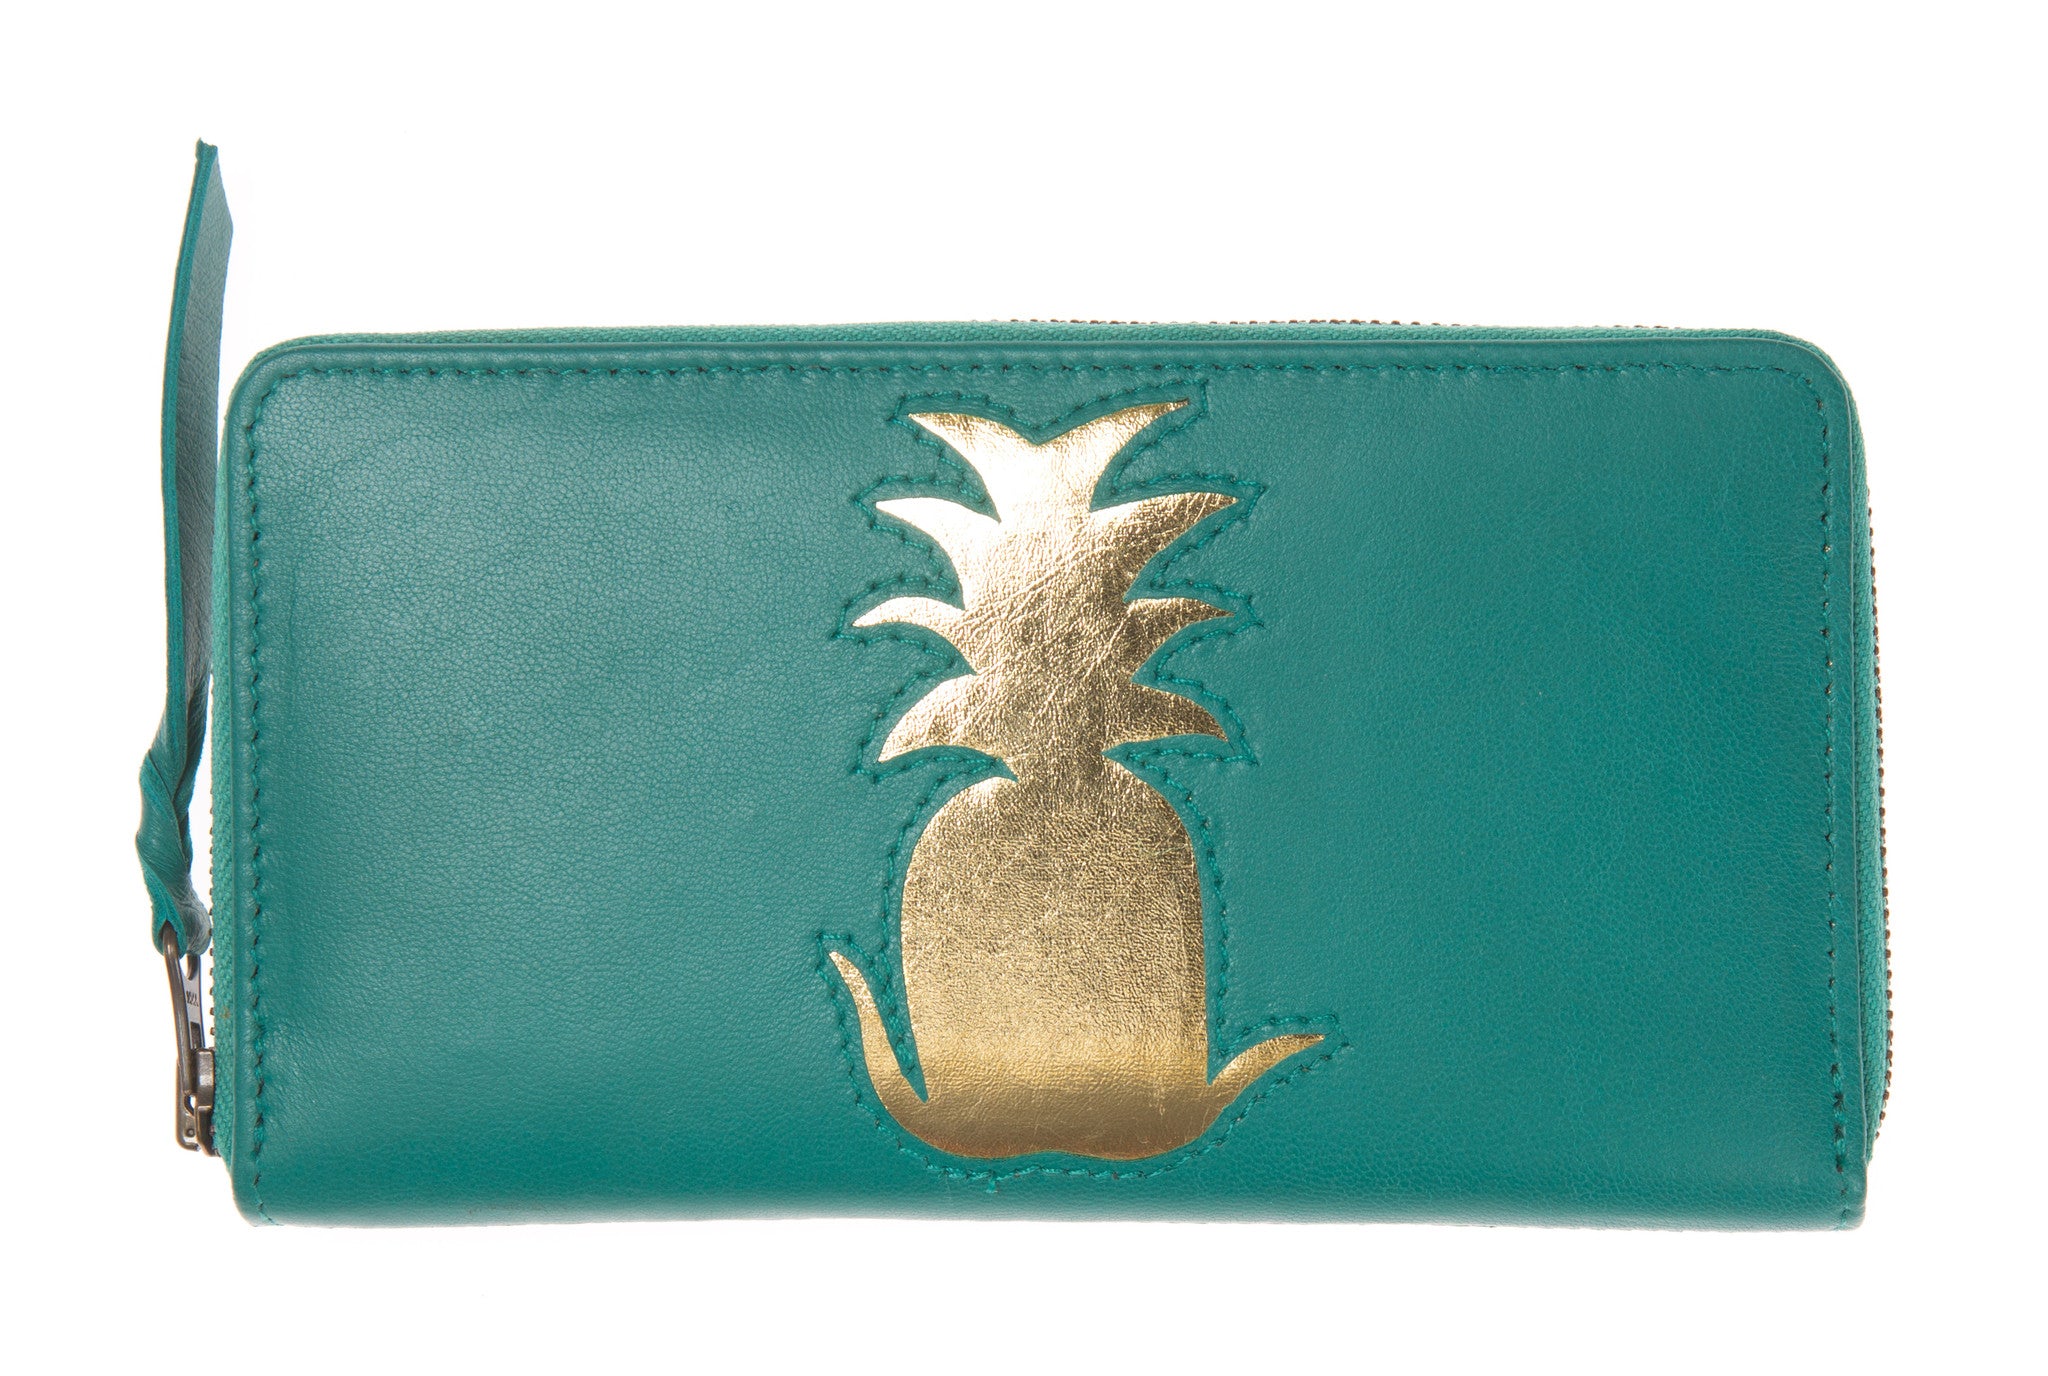 Summer Sale - Jade Leather Pineapple Cut Out Purse